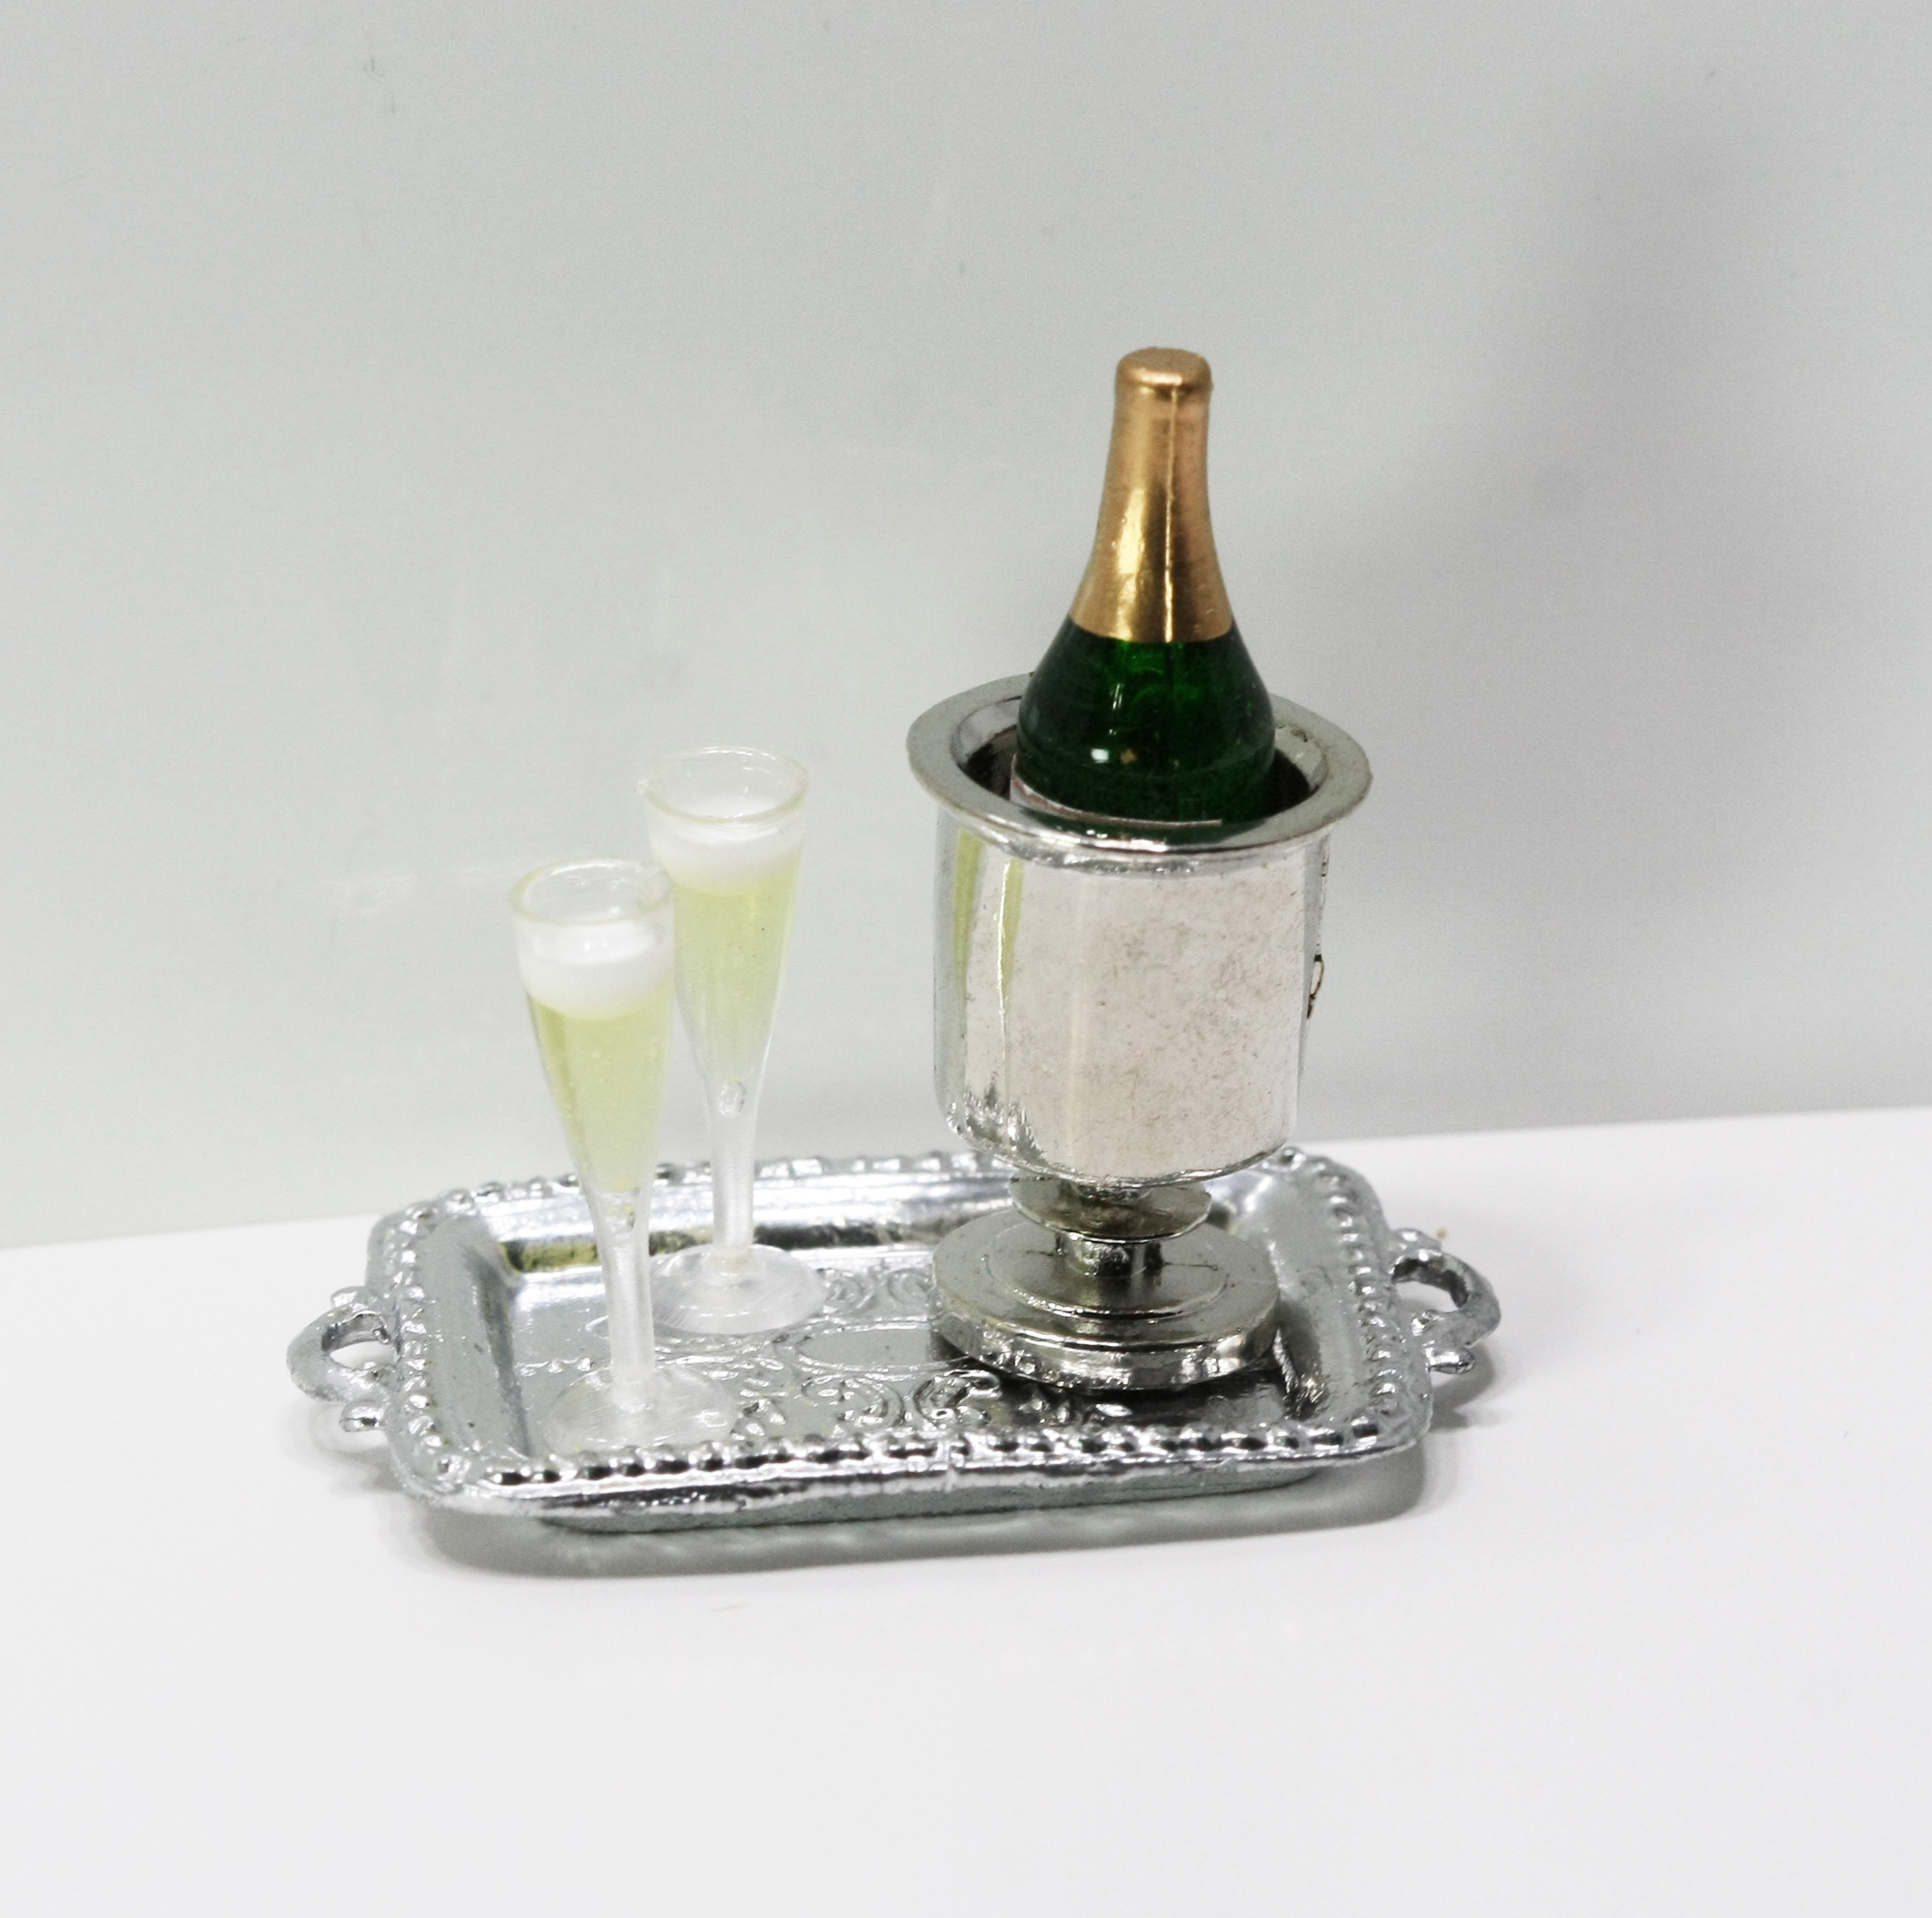 Bottle of Champagne in Holder with 2 Filled Glasses on A Silver Tray